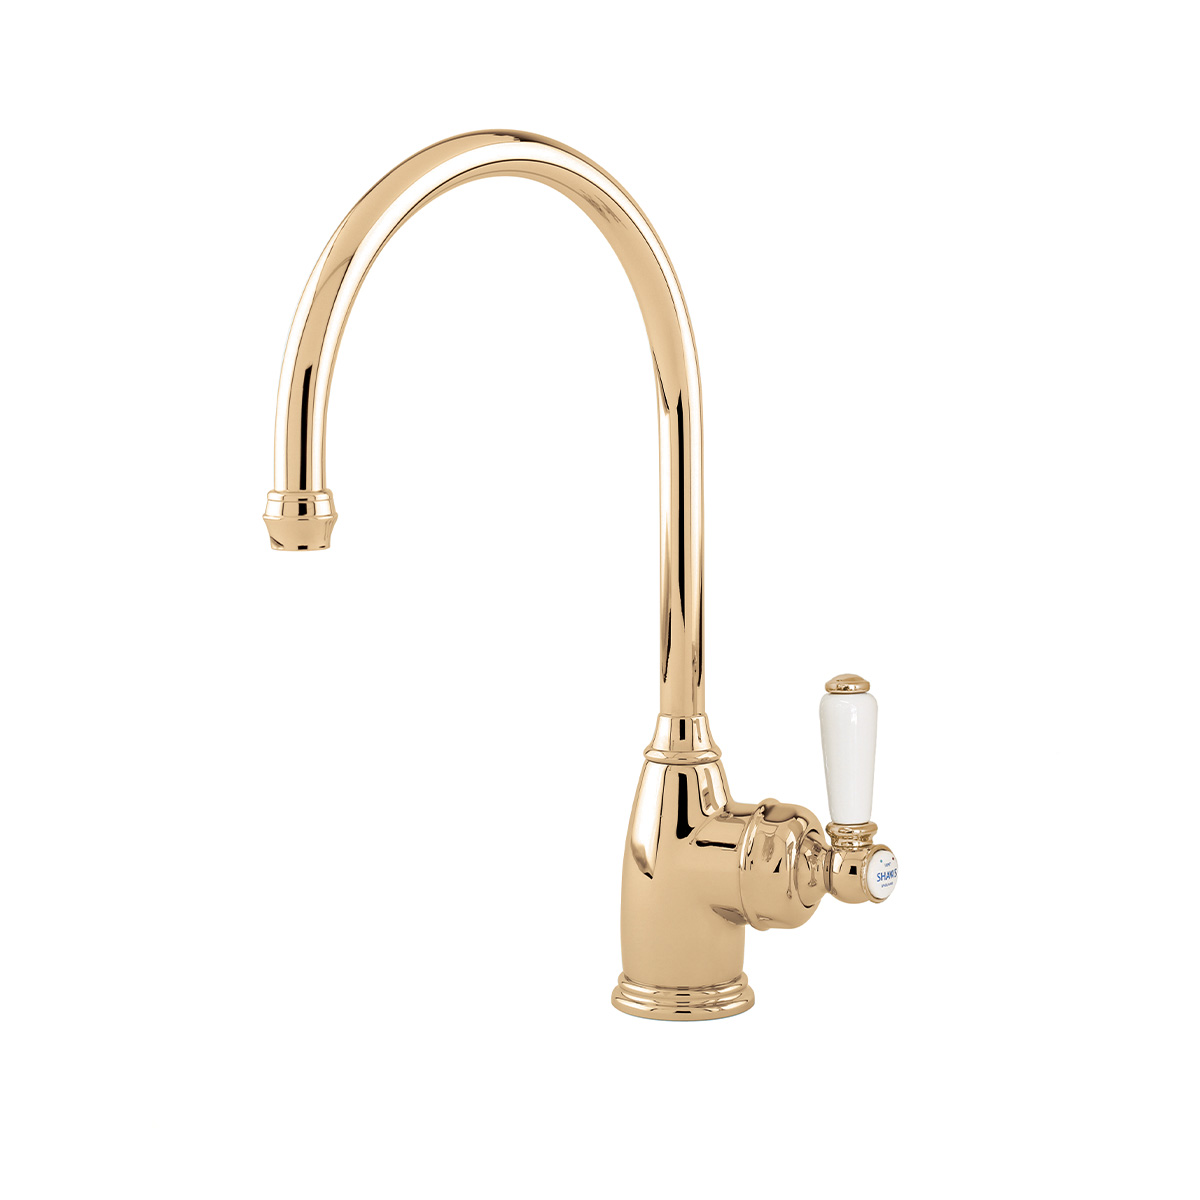 Shaws by Perrin & Rowe Yarrow kitchen mixer in Polished Brass. Parthian style monobloc kitchen tap AUSH.4341. Distributed in Australia by Luxe by Design, Brisbane.